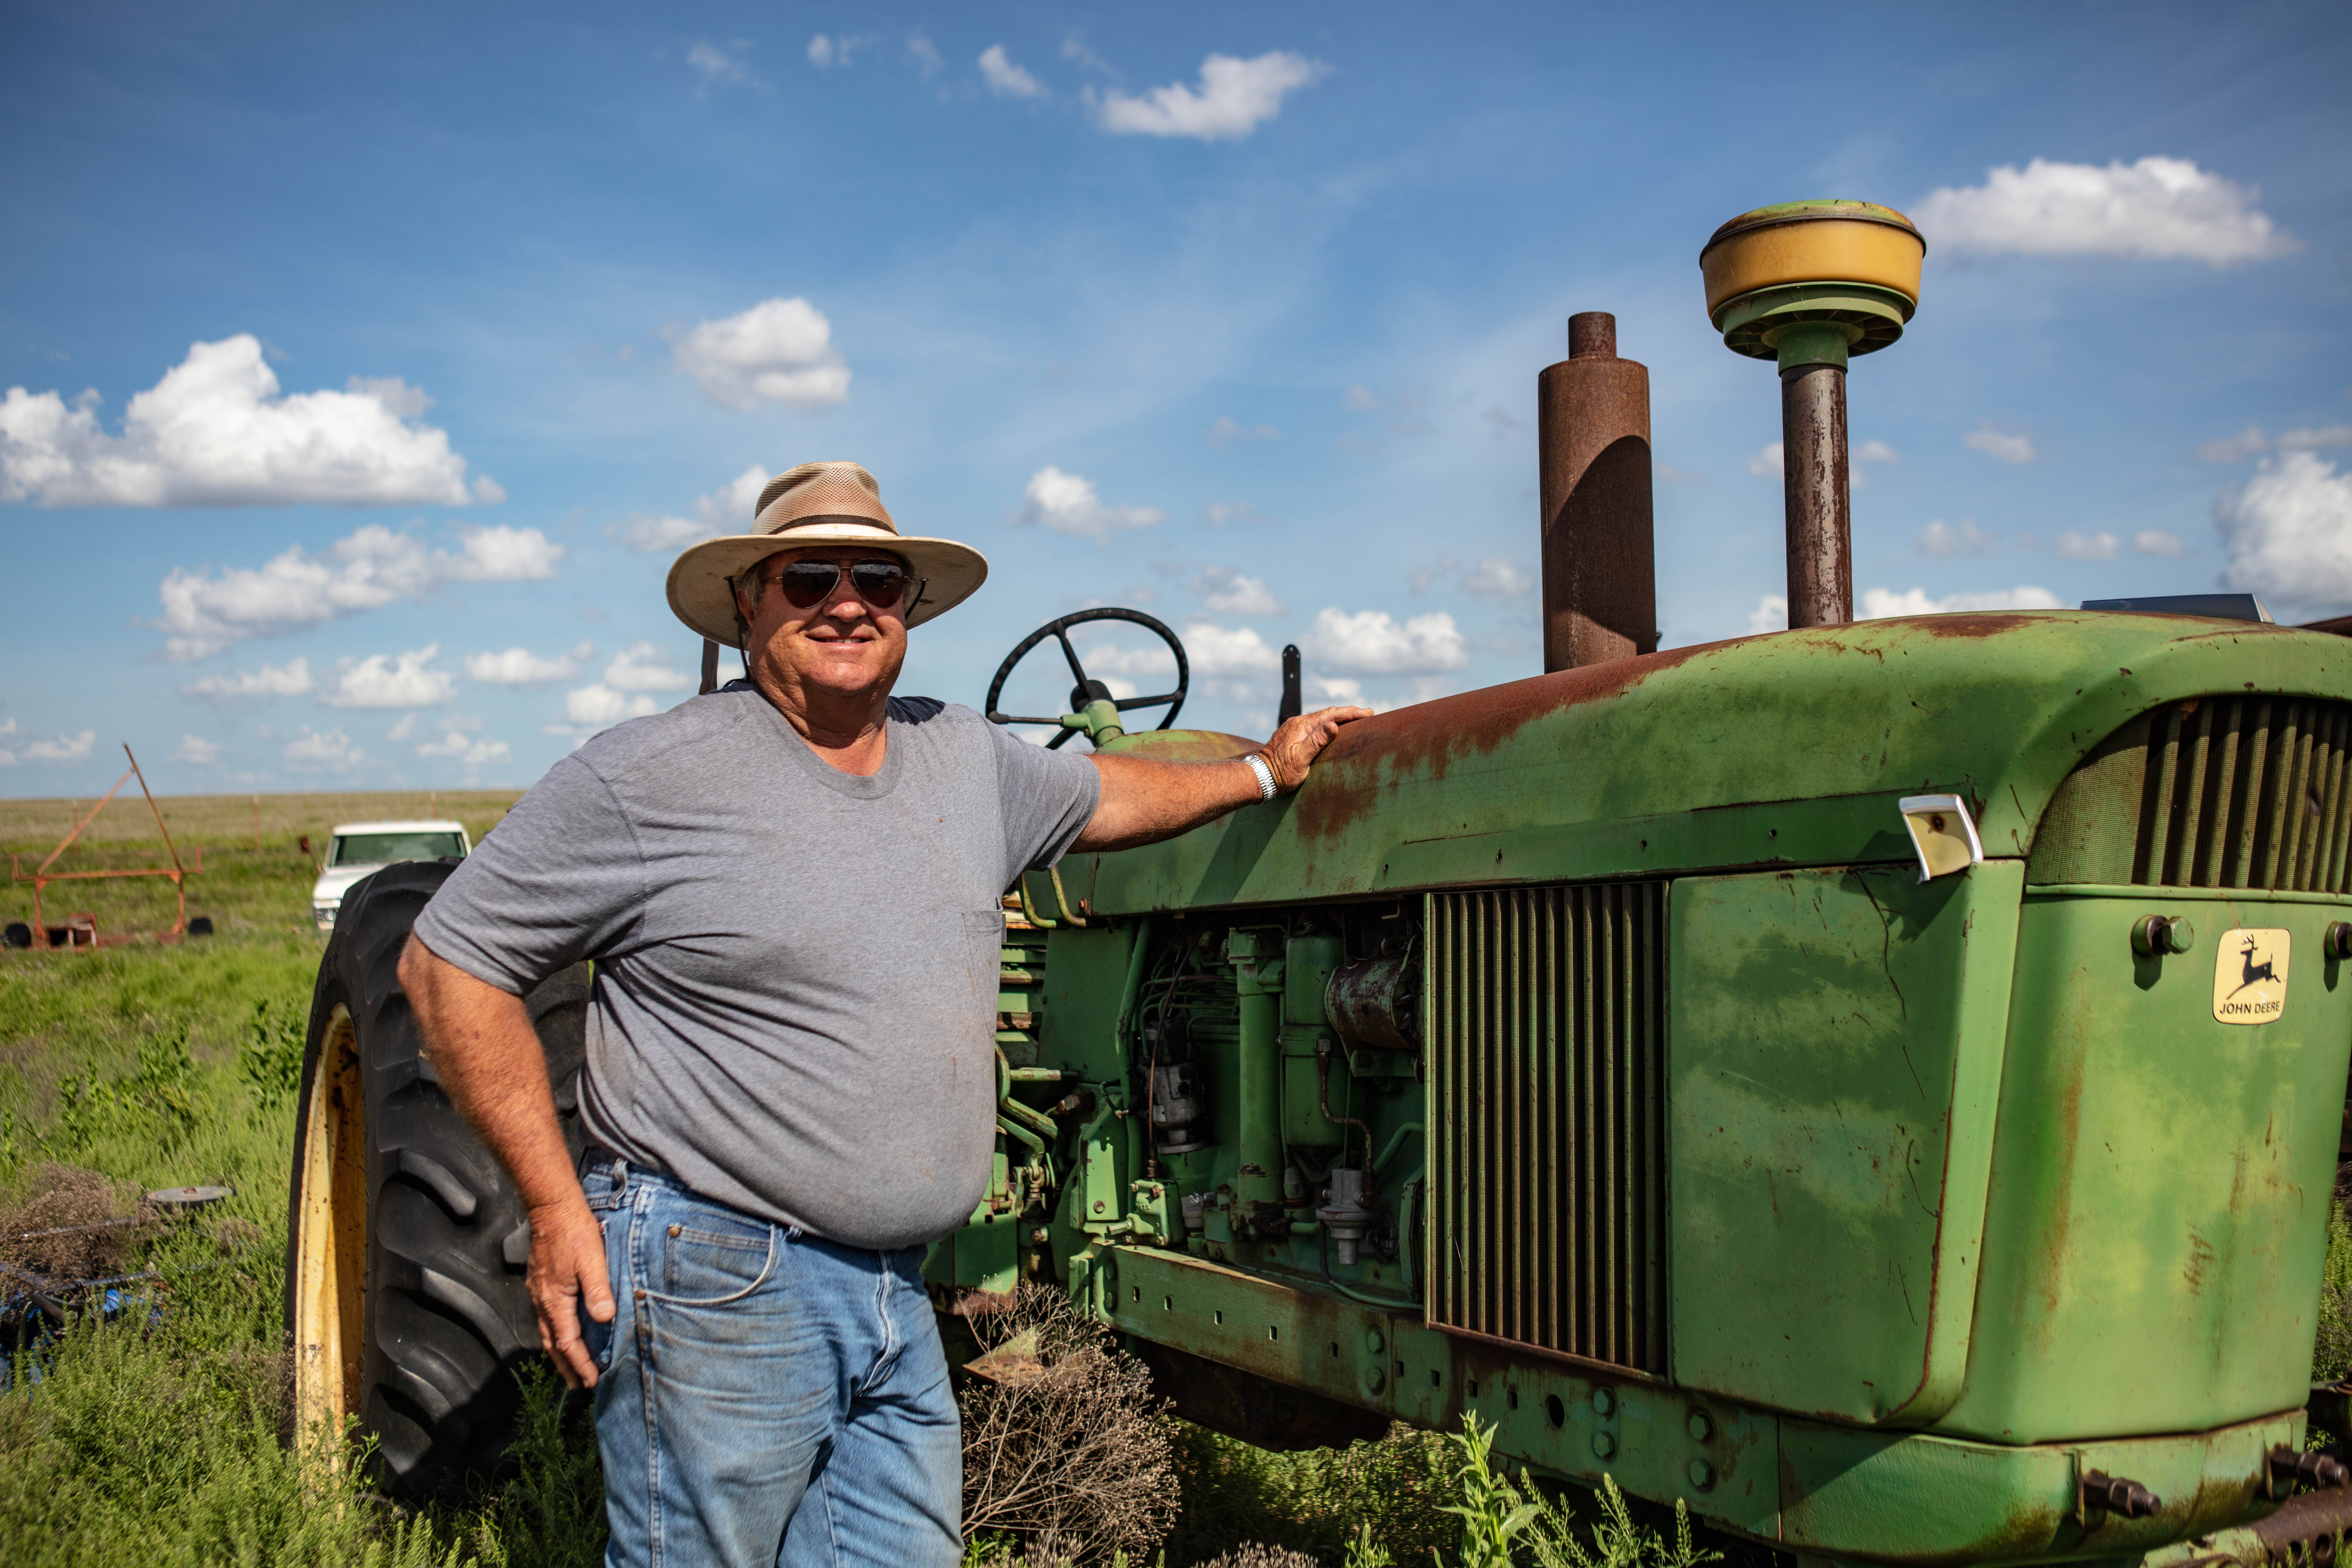 chris hunt poses with his tractor